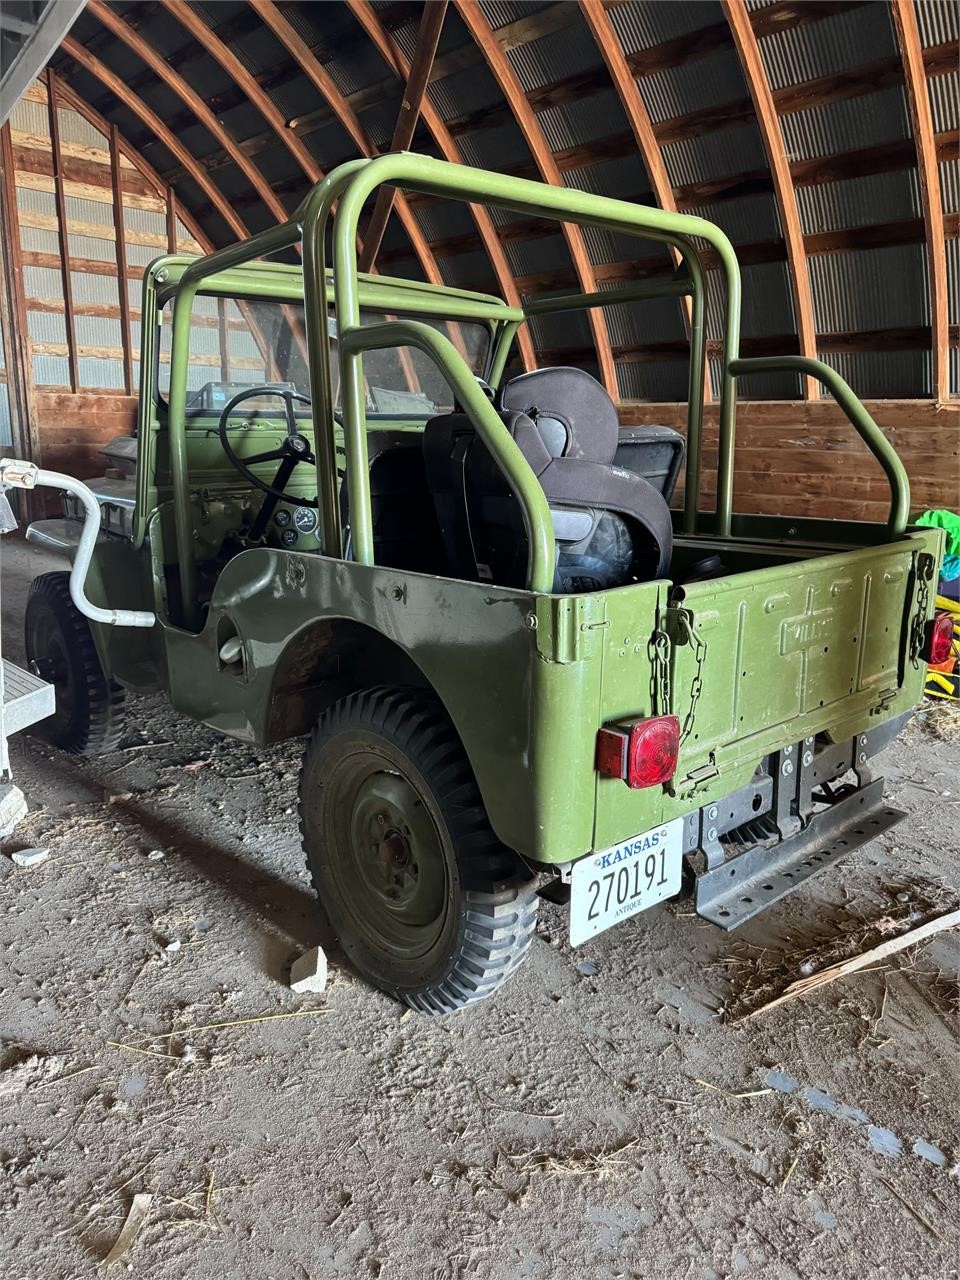 1953 Willy Jeep